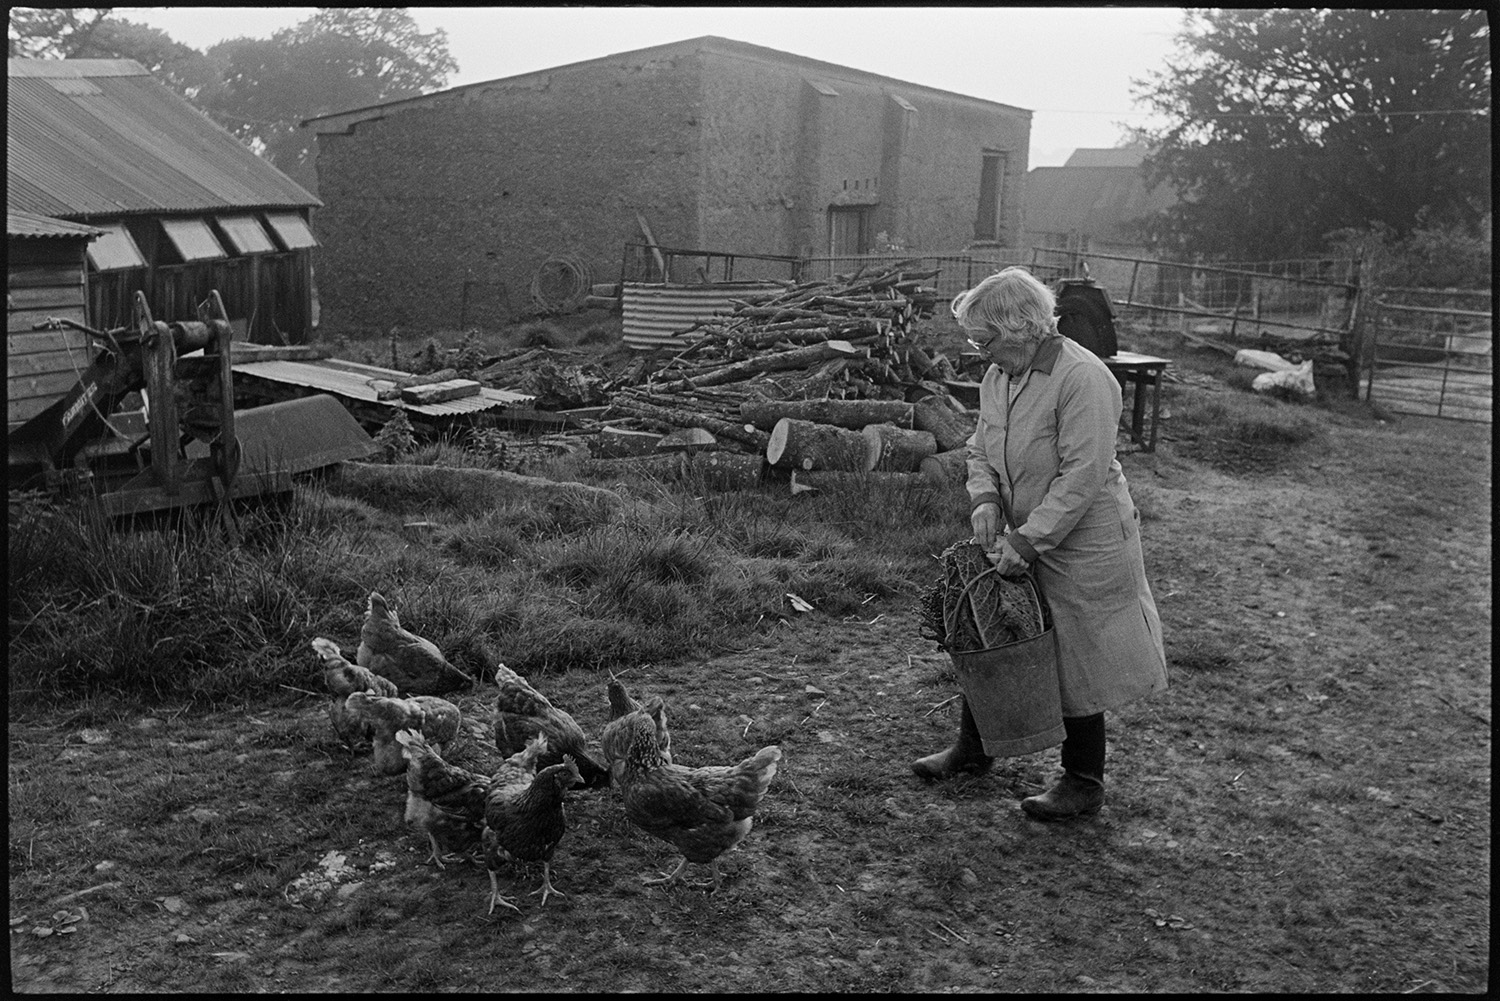 Farmers wife woman feeding chickens. 
[May Pugsley feeding chickens in the farmyard at Lower Langham, Dolton. Barns, a poultry house with windows, farm machinery and a log pile can be seen in the background.]